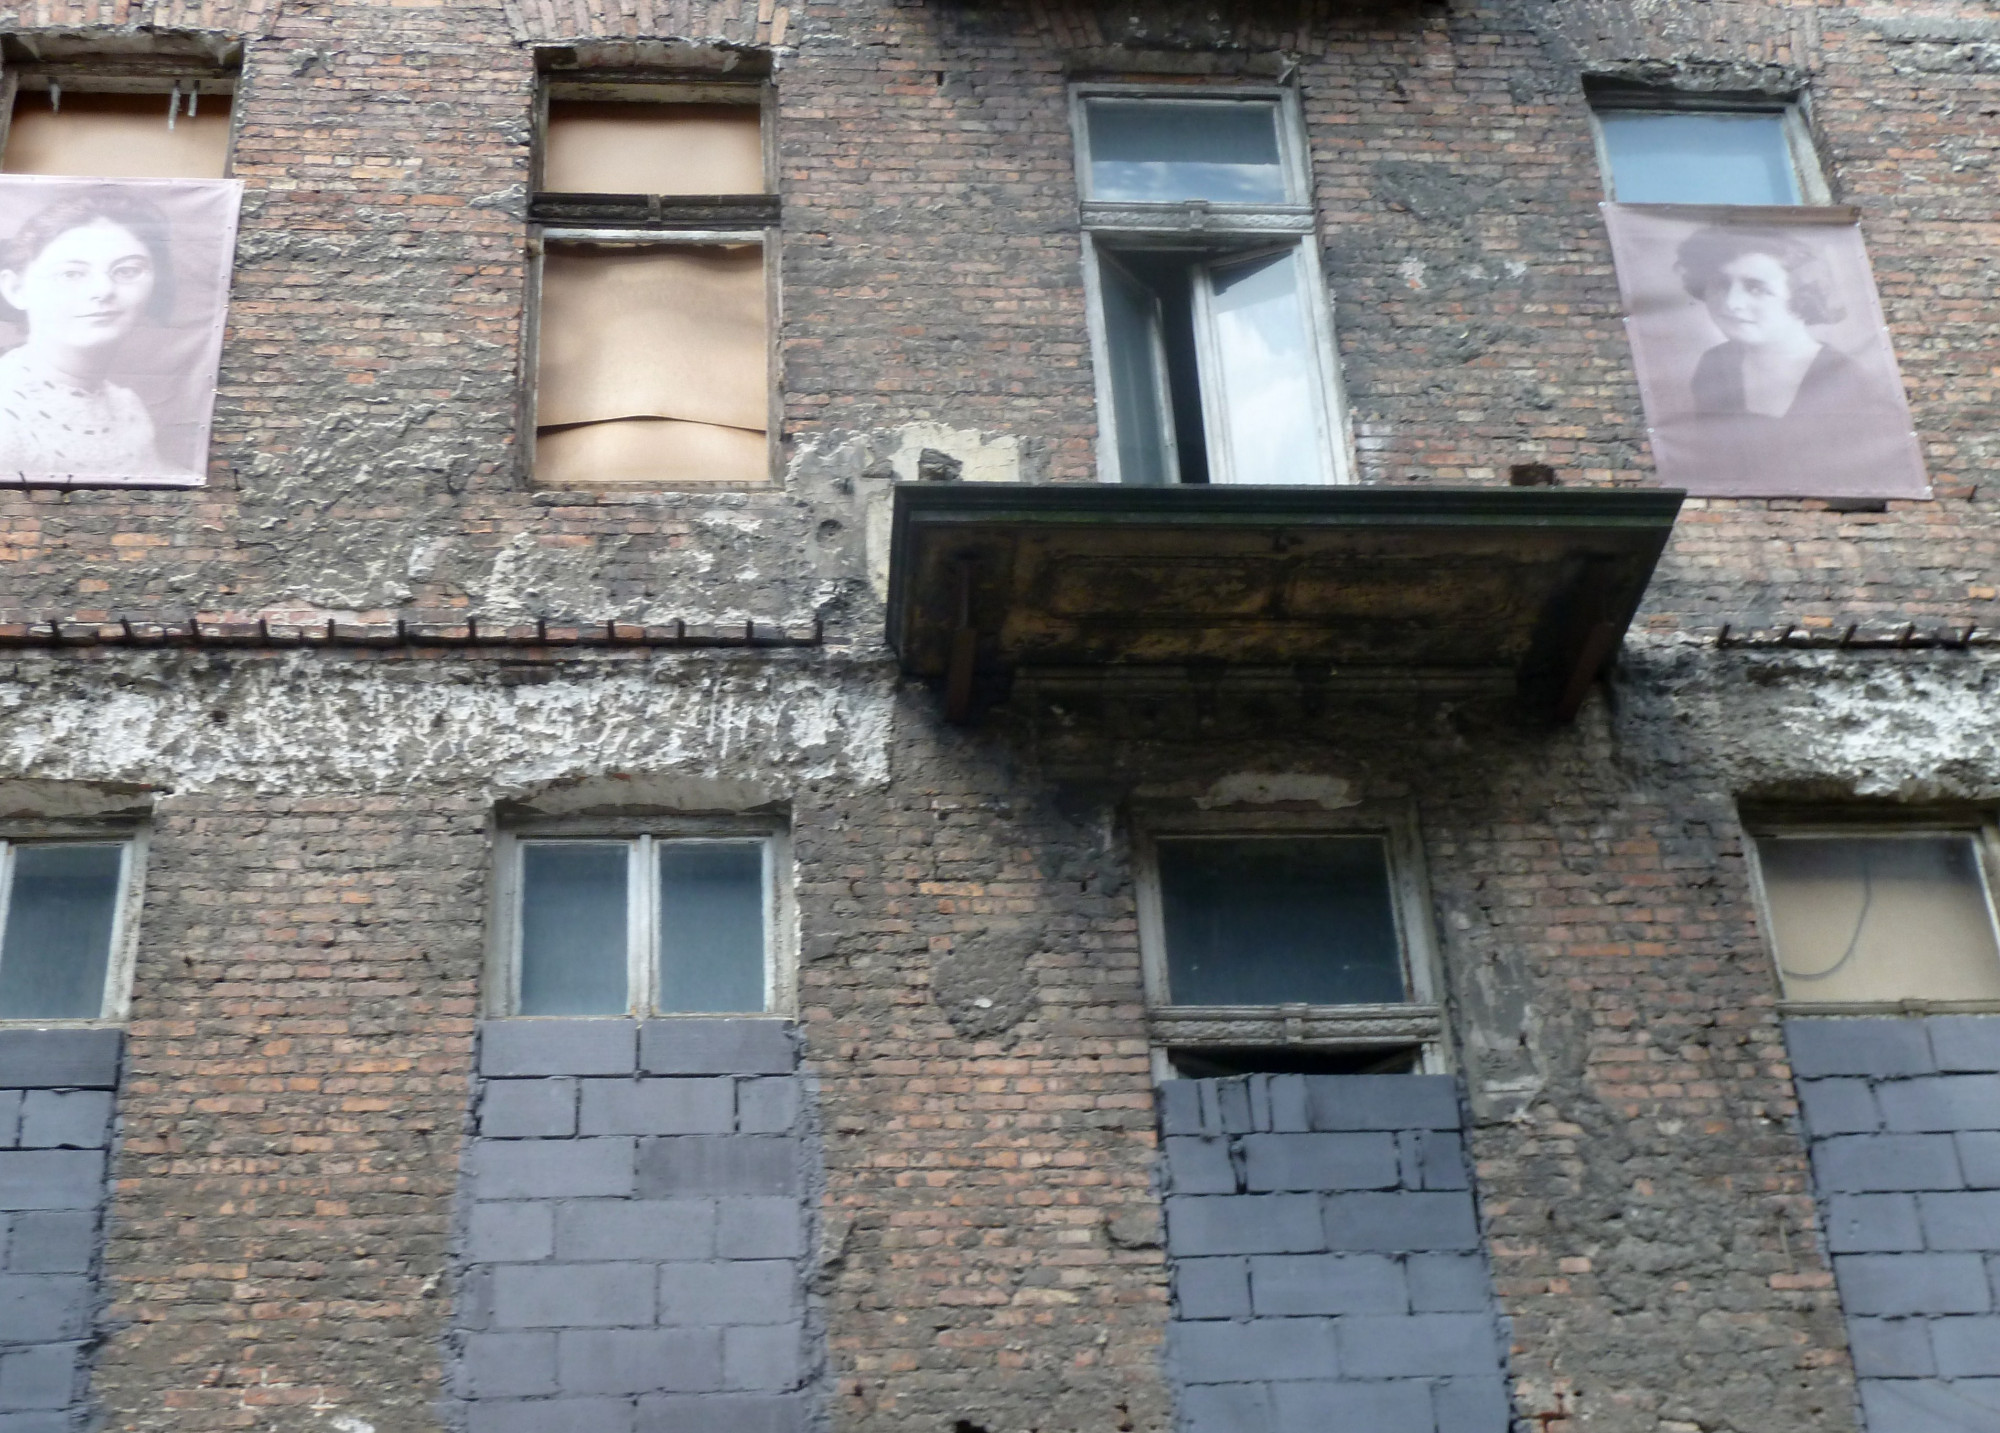 Warsaw Ghetto Remnant Buildings, Poland